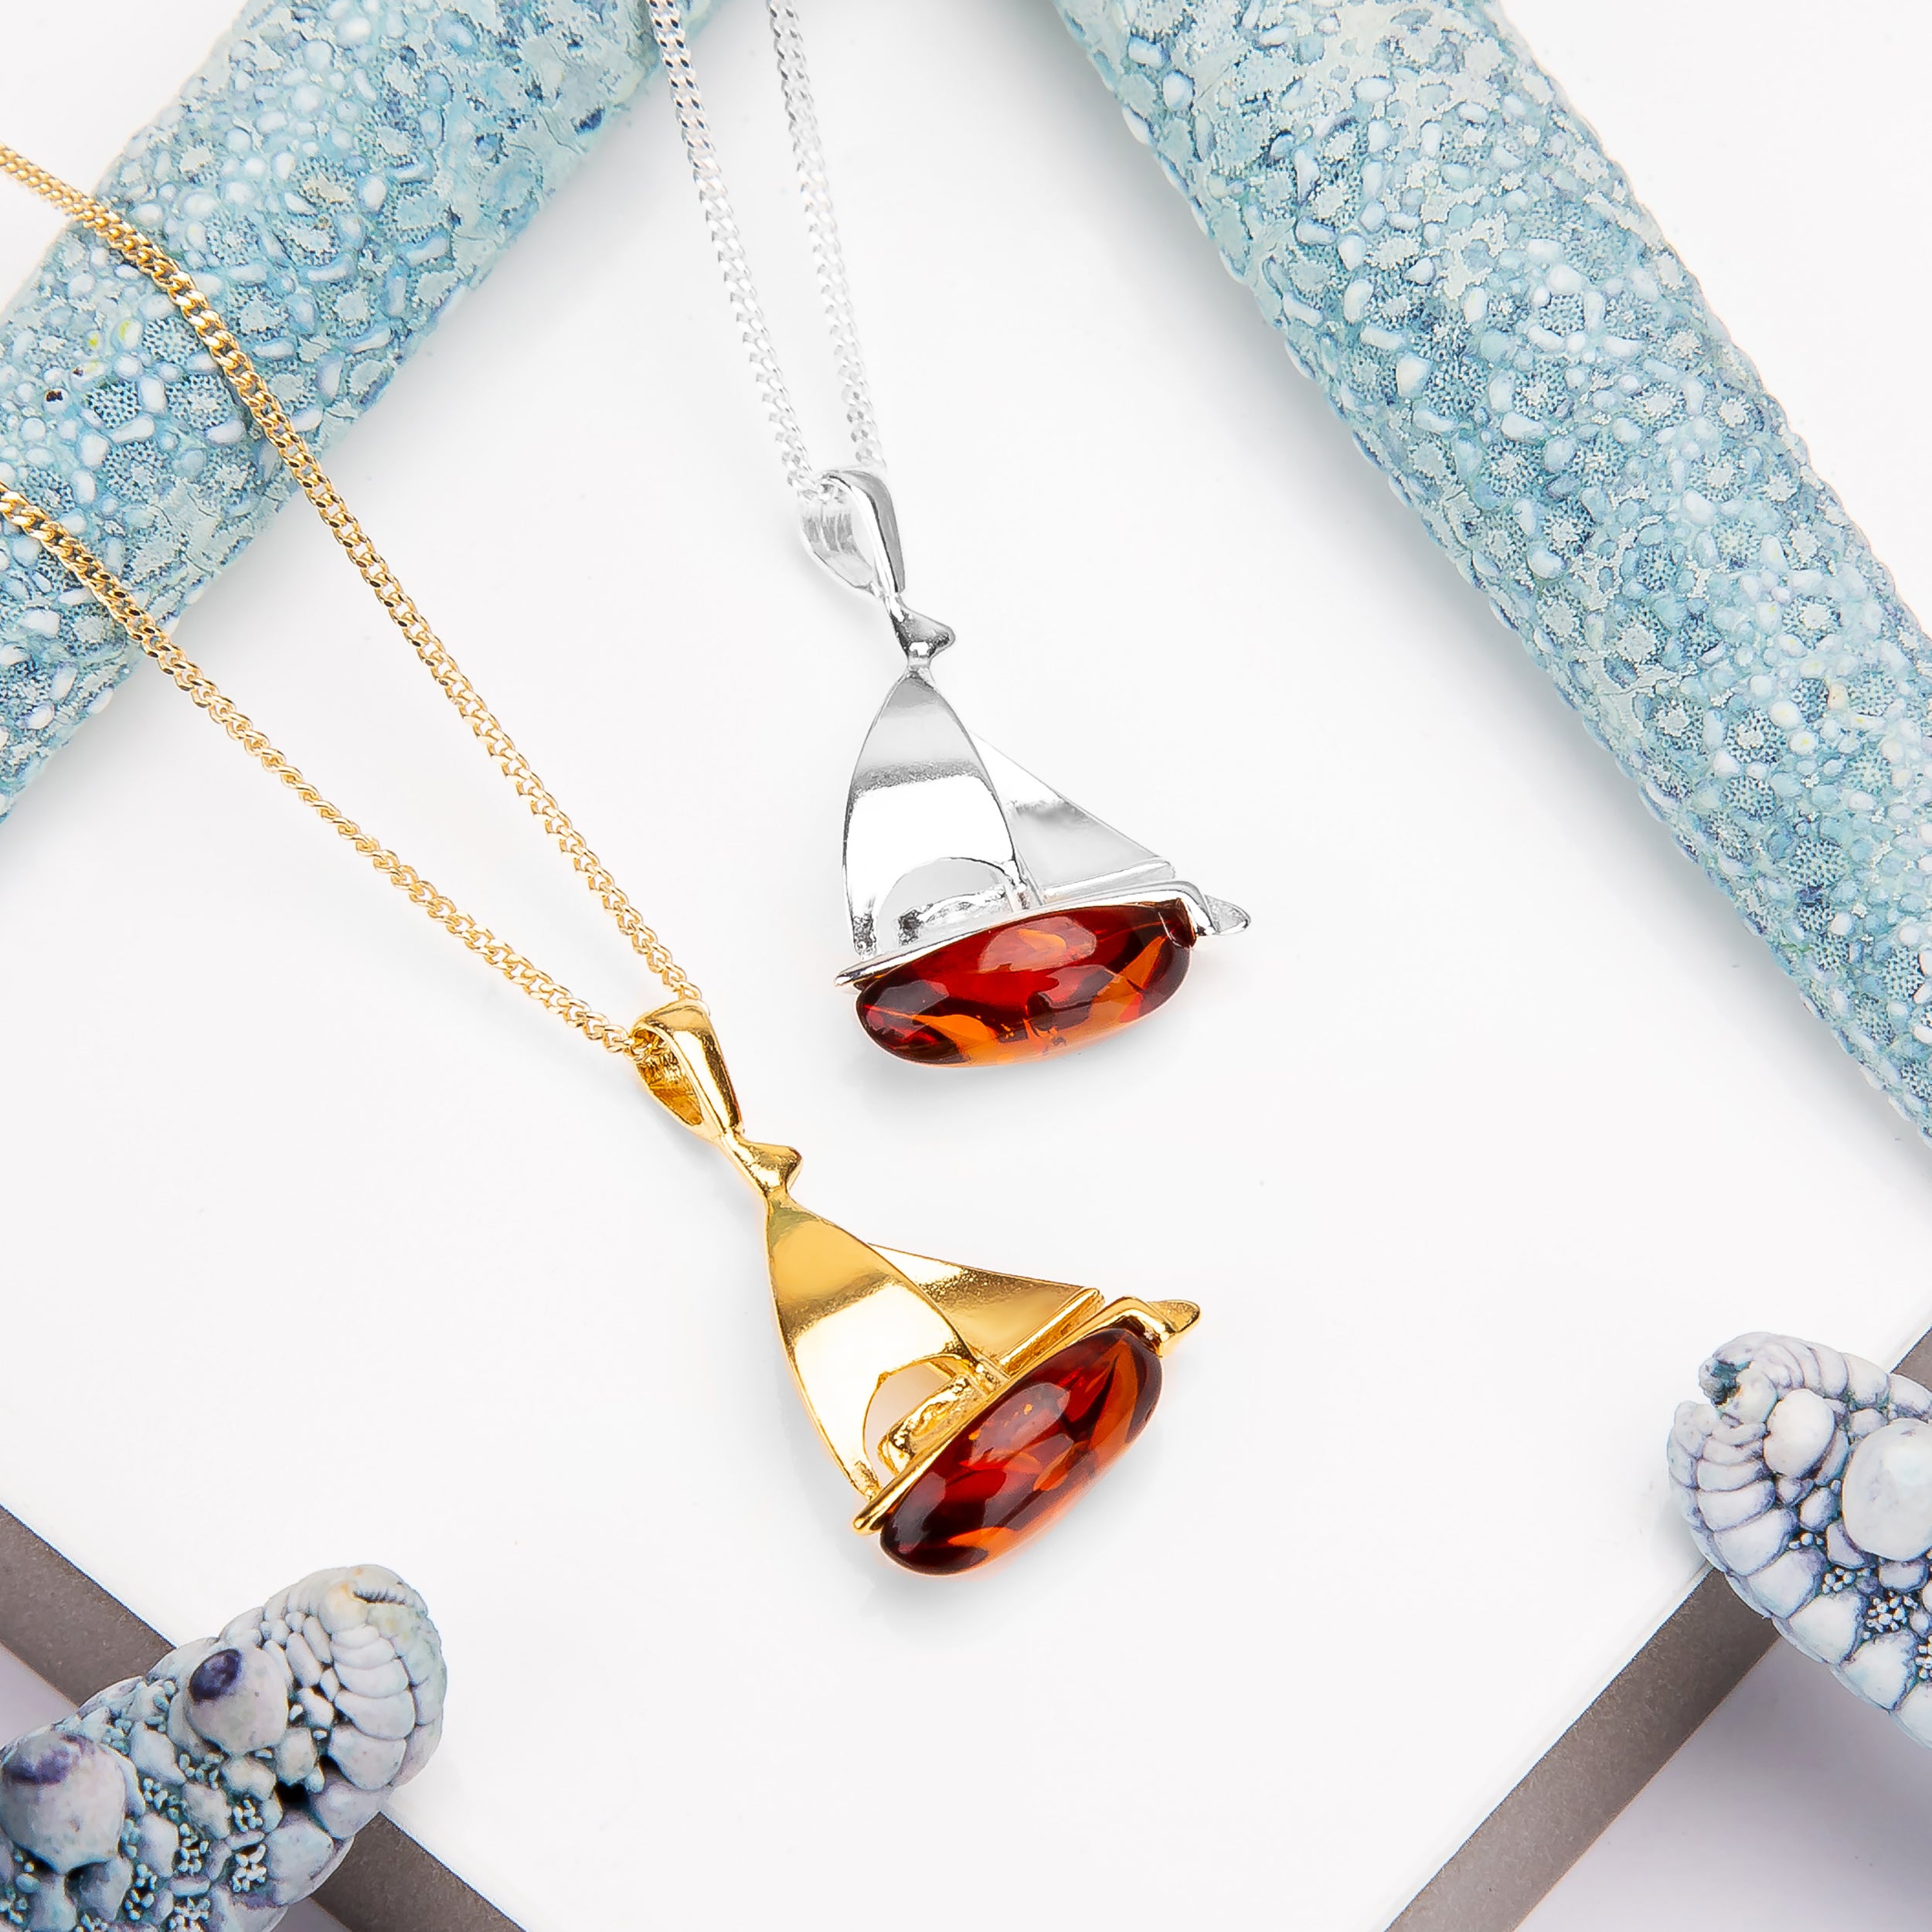 Sailboat / Boat / Yacht Necklace in Amber & Silver With 24ct Gold - Gold 16/42cm